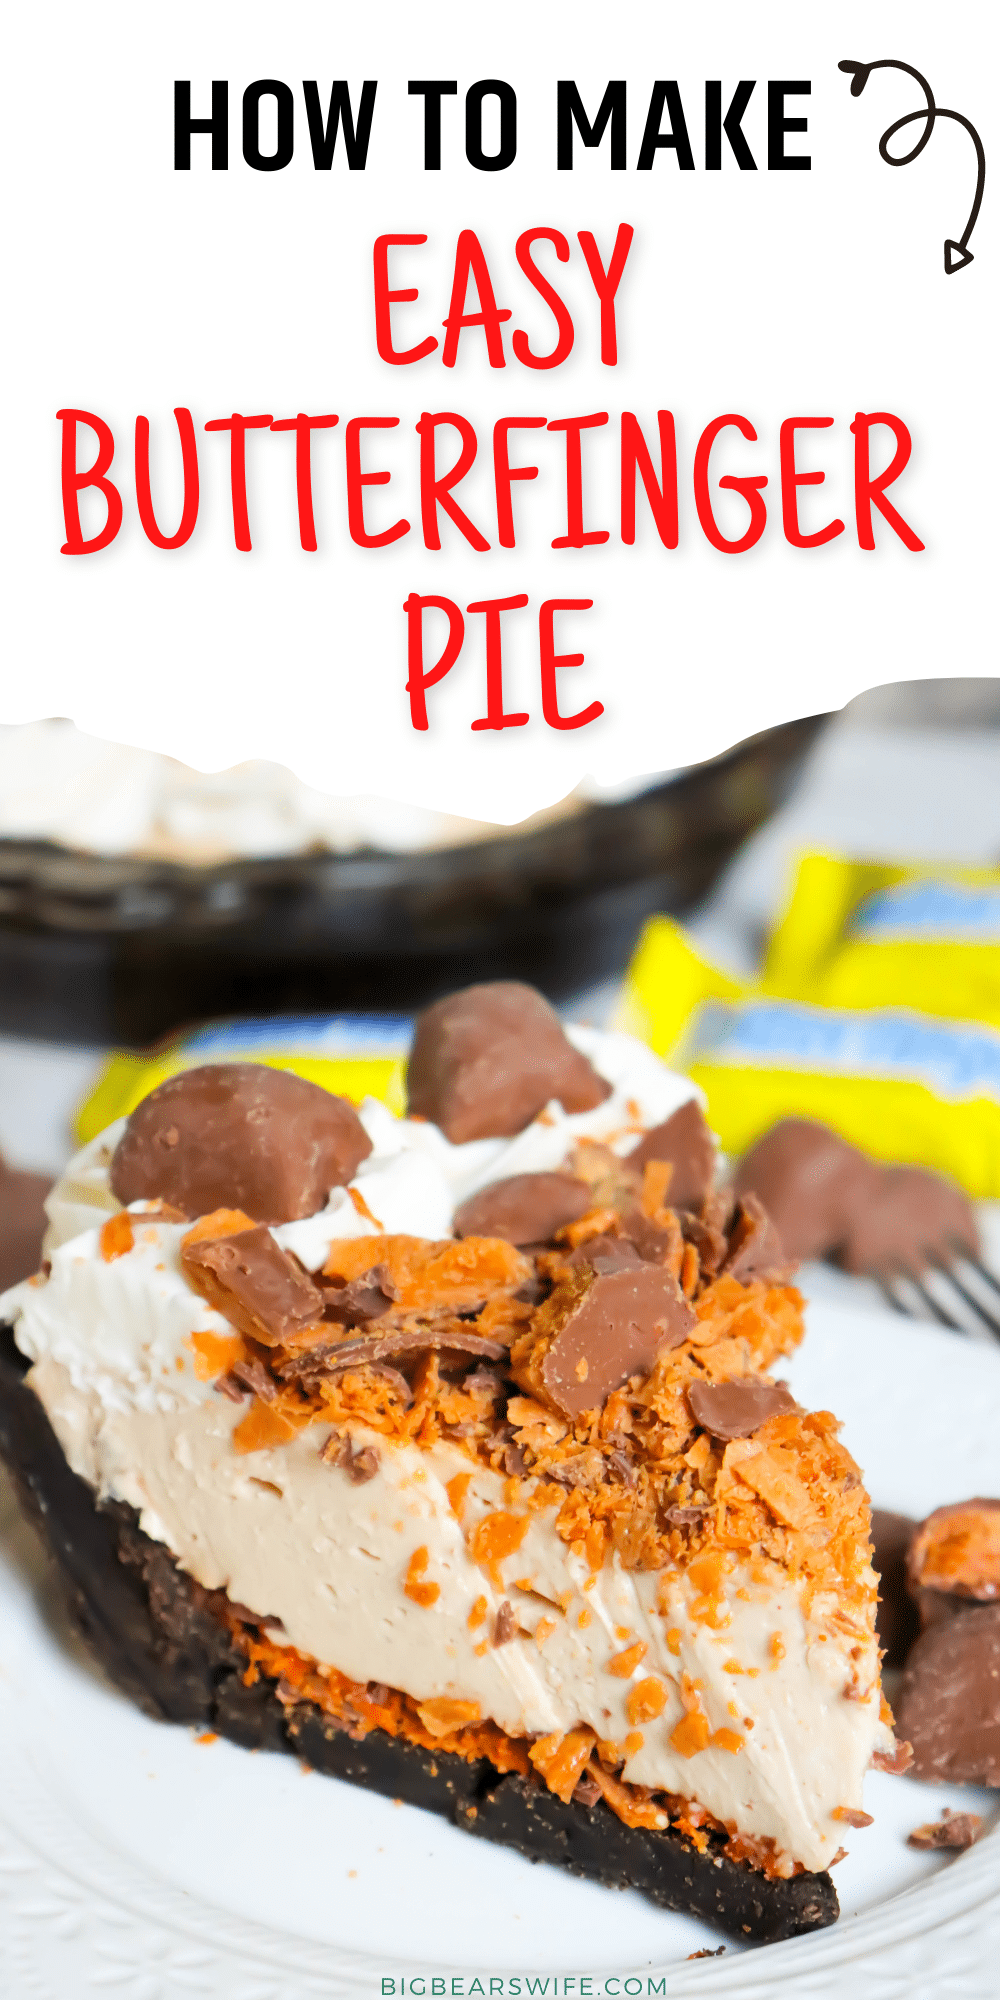 Love Butterfinger® candy bars? This sweet Butterfinger Pie is packed full of Butterfinger candies, peanut butter and chocolate. An easy, no bake pie for the chocolate lover in your life that likes a bit of crunch.  via @bigbearswife